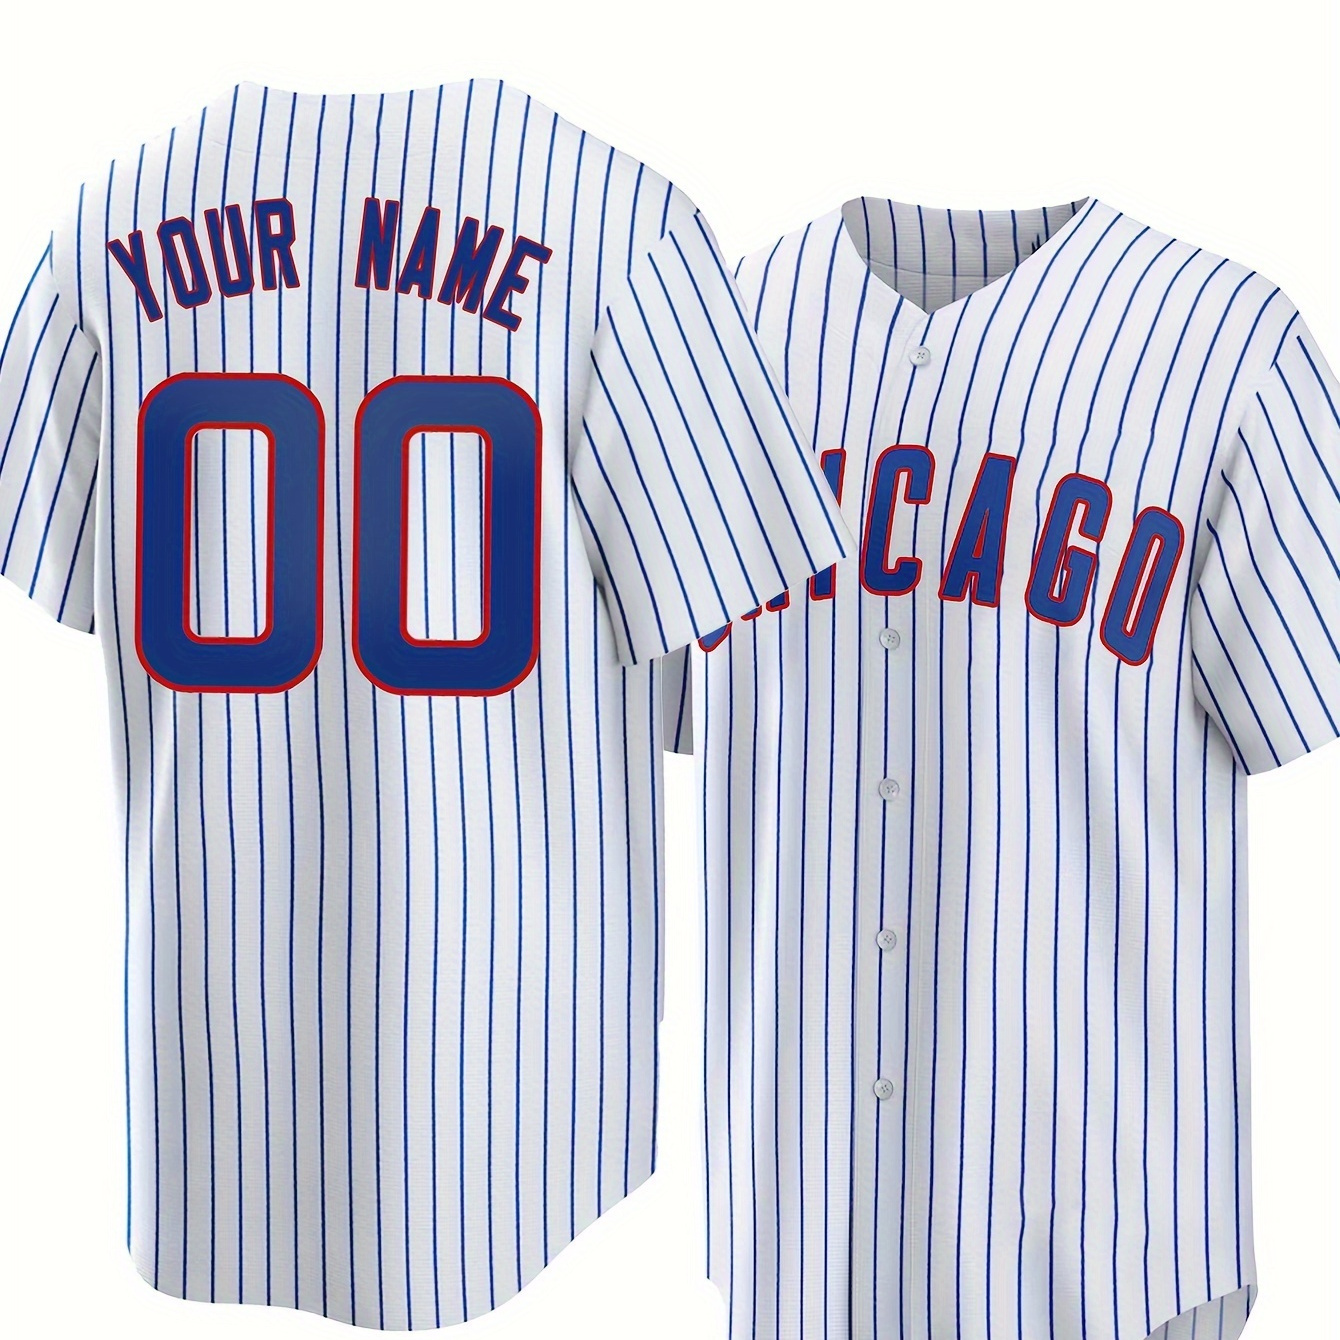 

Customized Name And Number, Chicago Embroidery Men's Stripe Pattern V-neck Button Up Baseball Jersey, Summer Tops For Sports And Outdoors Wear